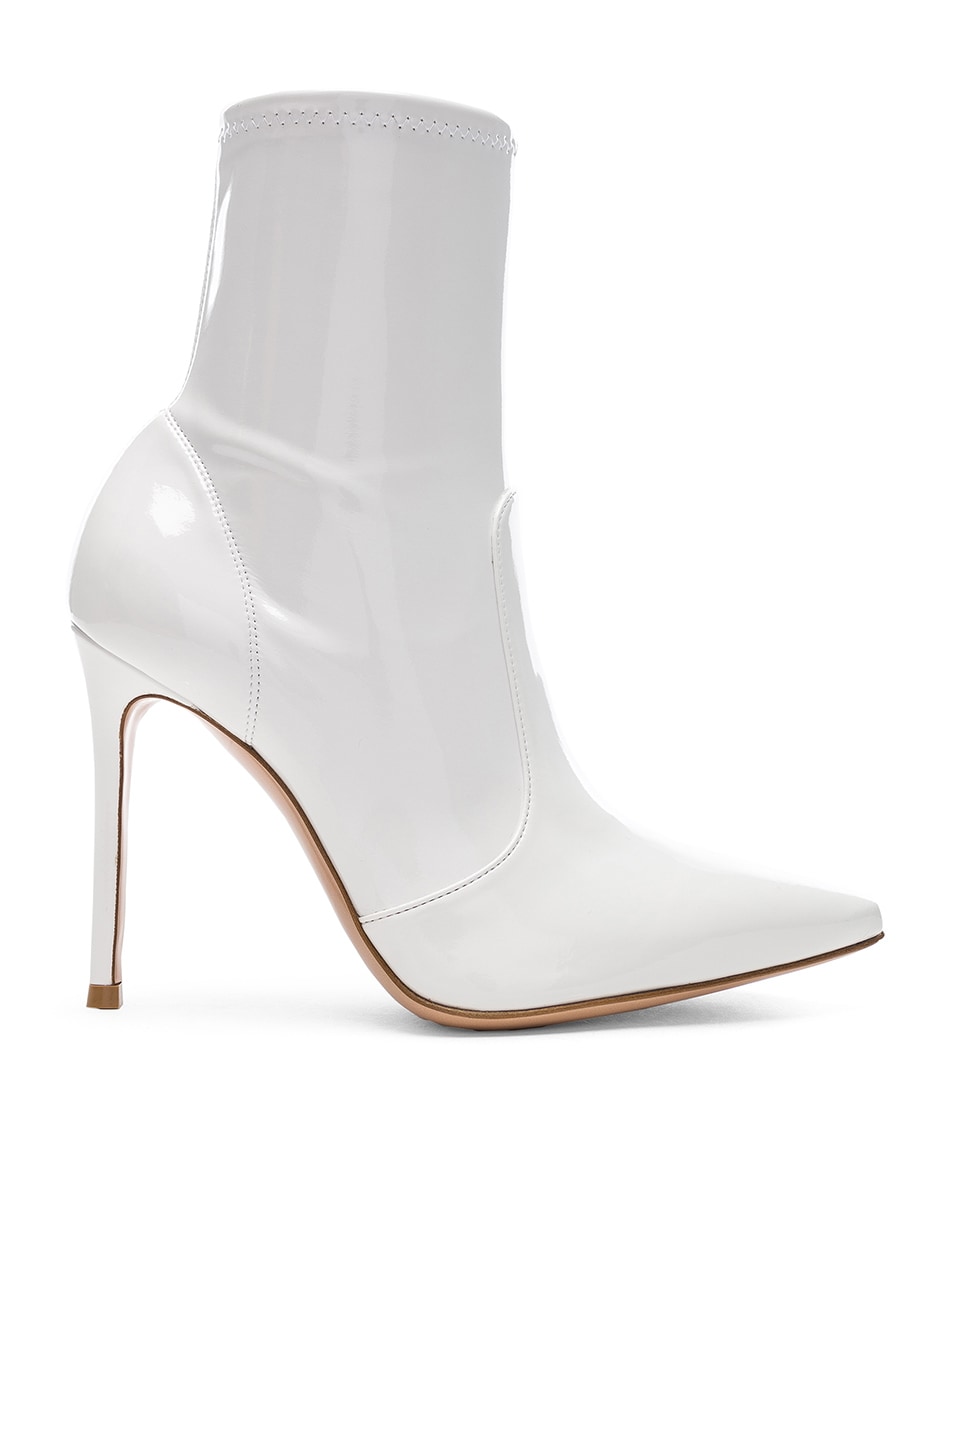 Image 1 of Gianvito Rossi Vinyl Imogen Ankle Boots in White